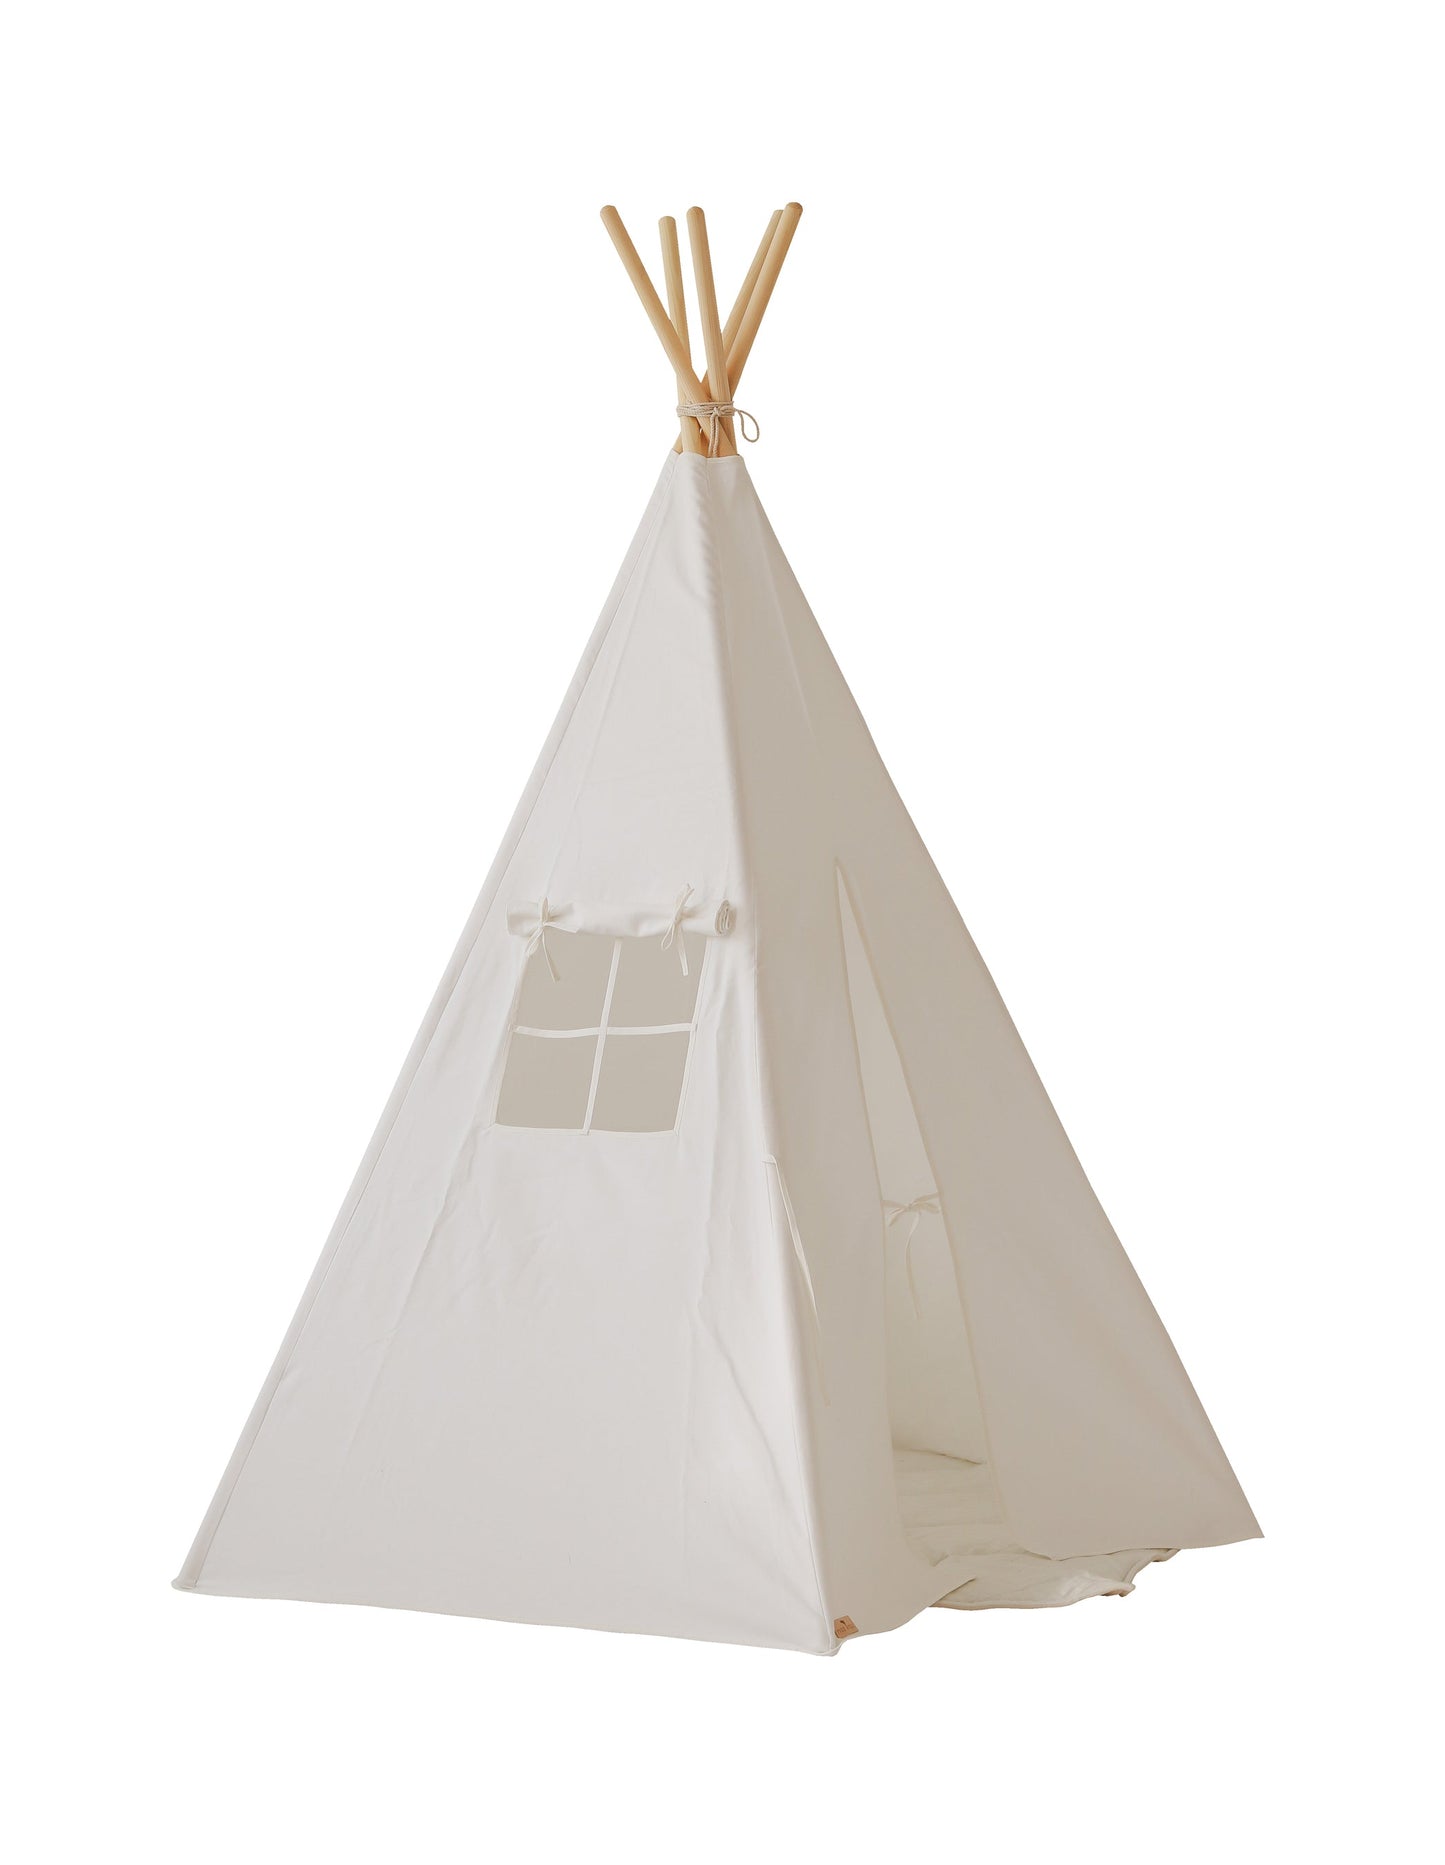 “White” Linen Teepee Tent and "White and Grey" Leaf Mat Set